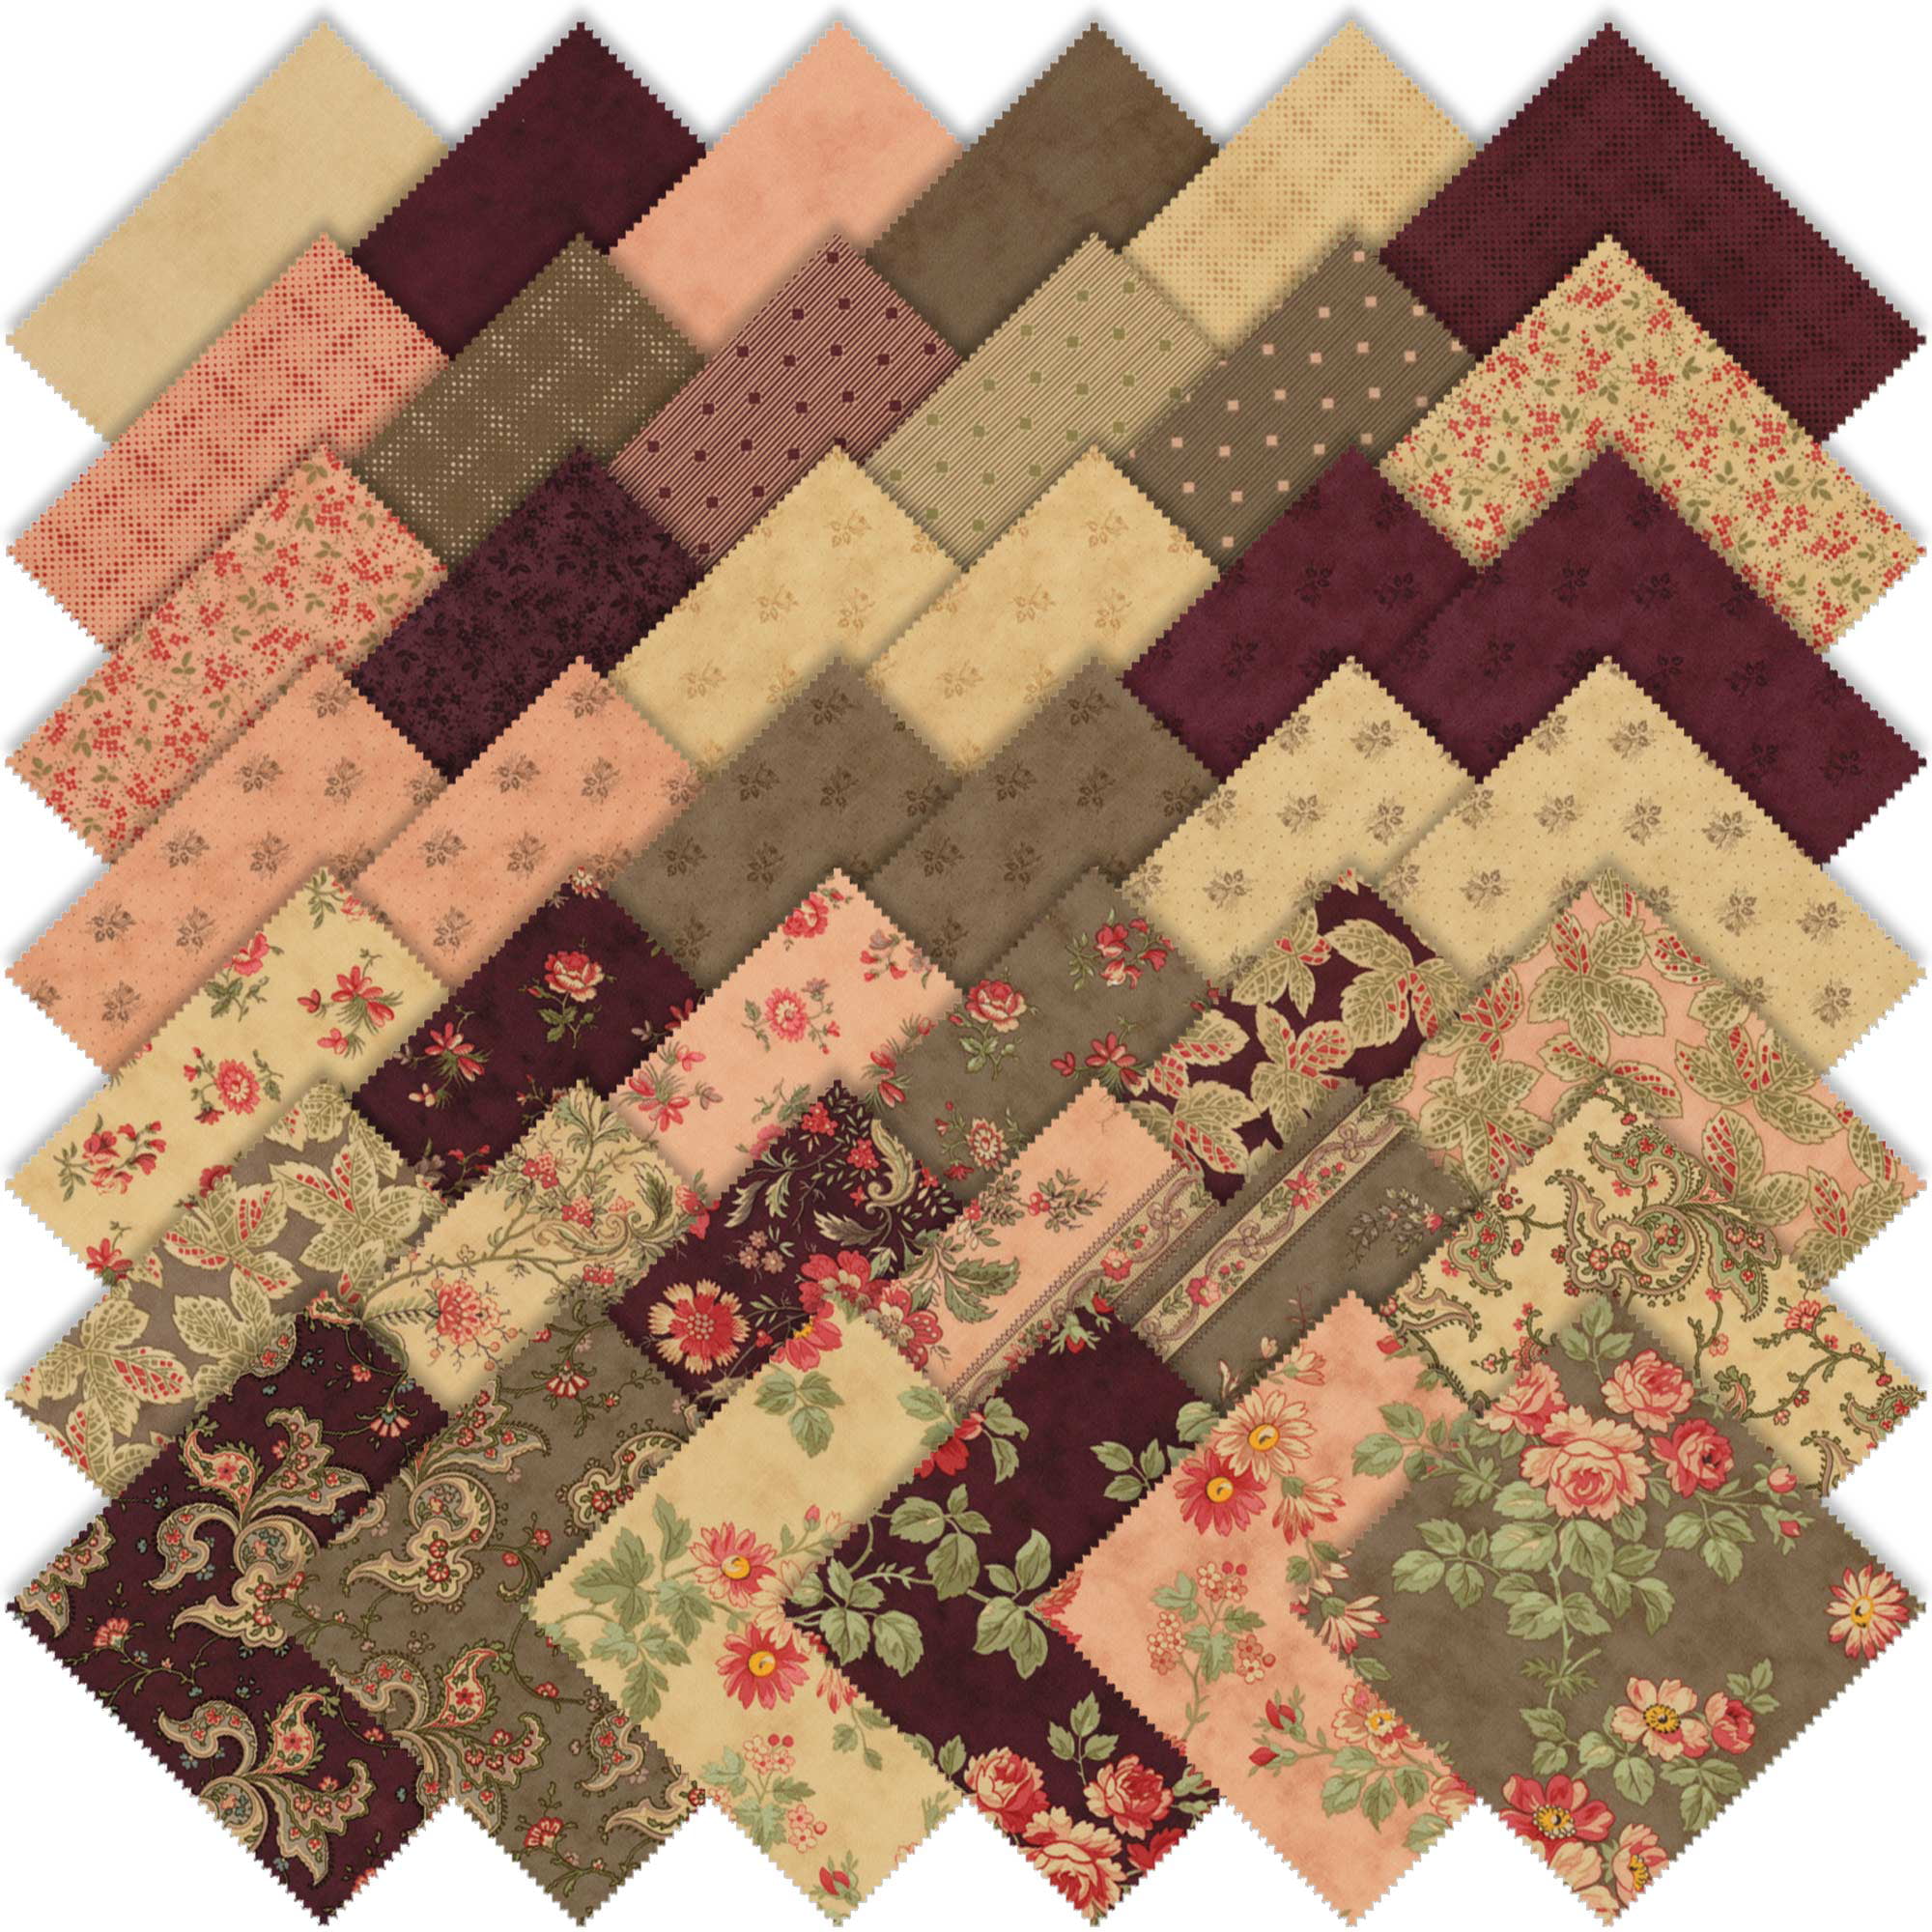 Moda Courtyard Charm Pack by 3 Sisters, 42 5